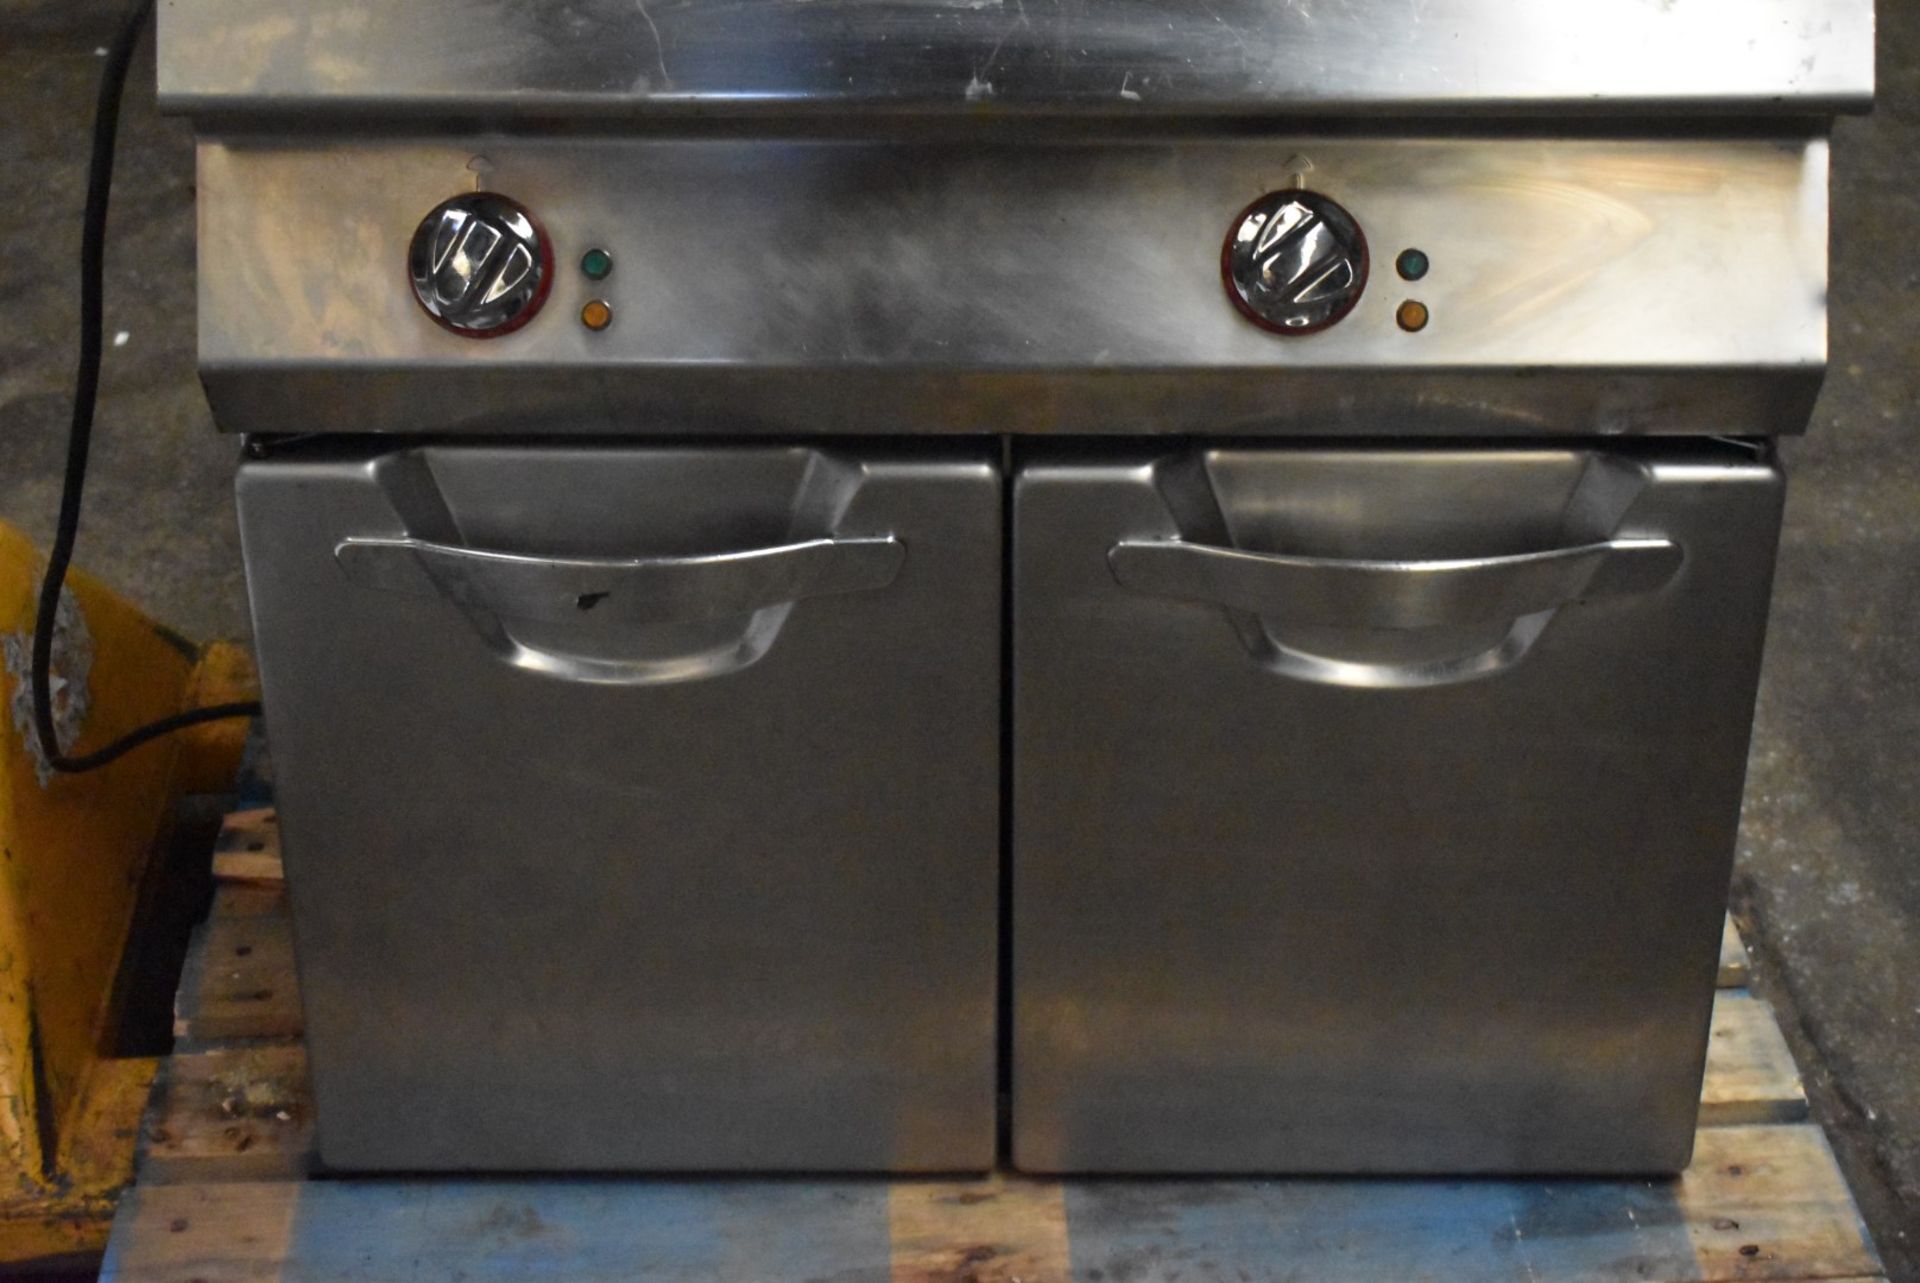 1 x Angelo Po Twin Tank Commercial Fryer - Includes Baskets - Removed From a Commercial Kitchen - Image 11 of 17